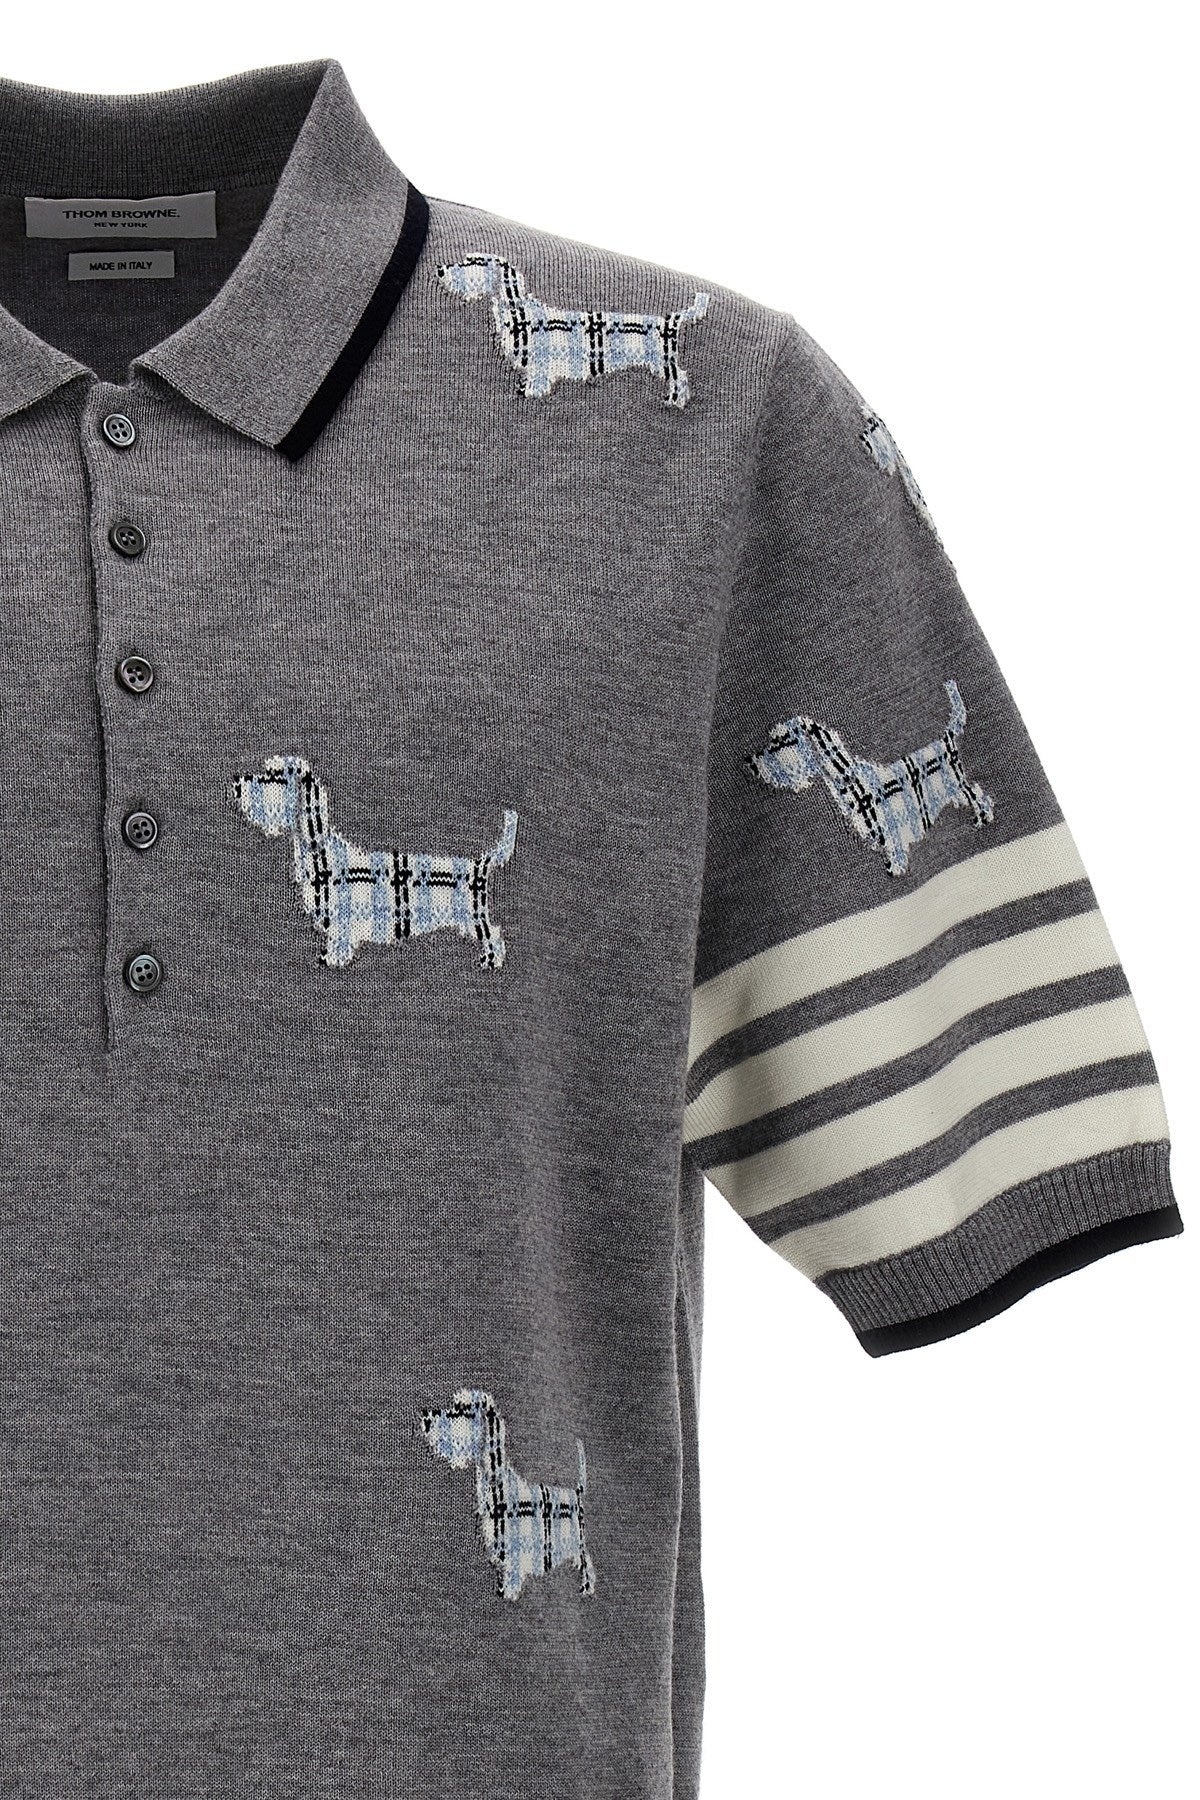 Thom Browne Men 'Hector' Polo Shirt - 2